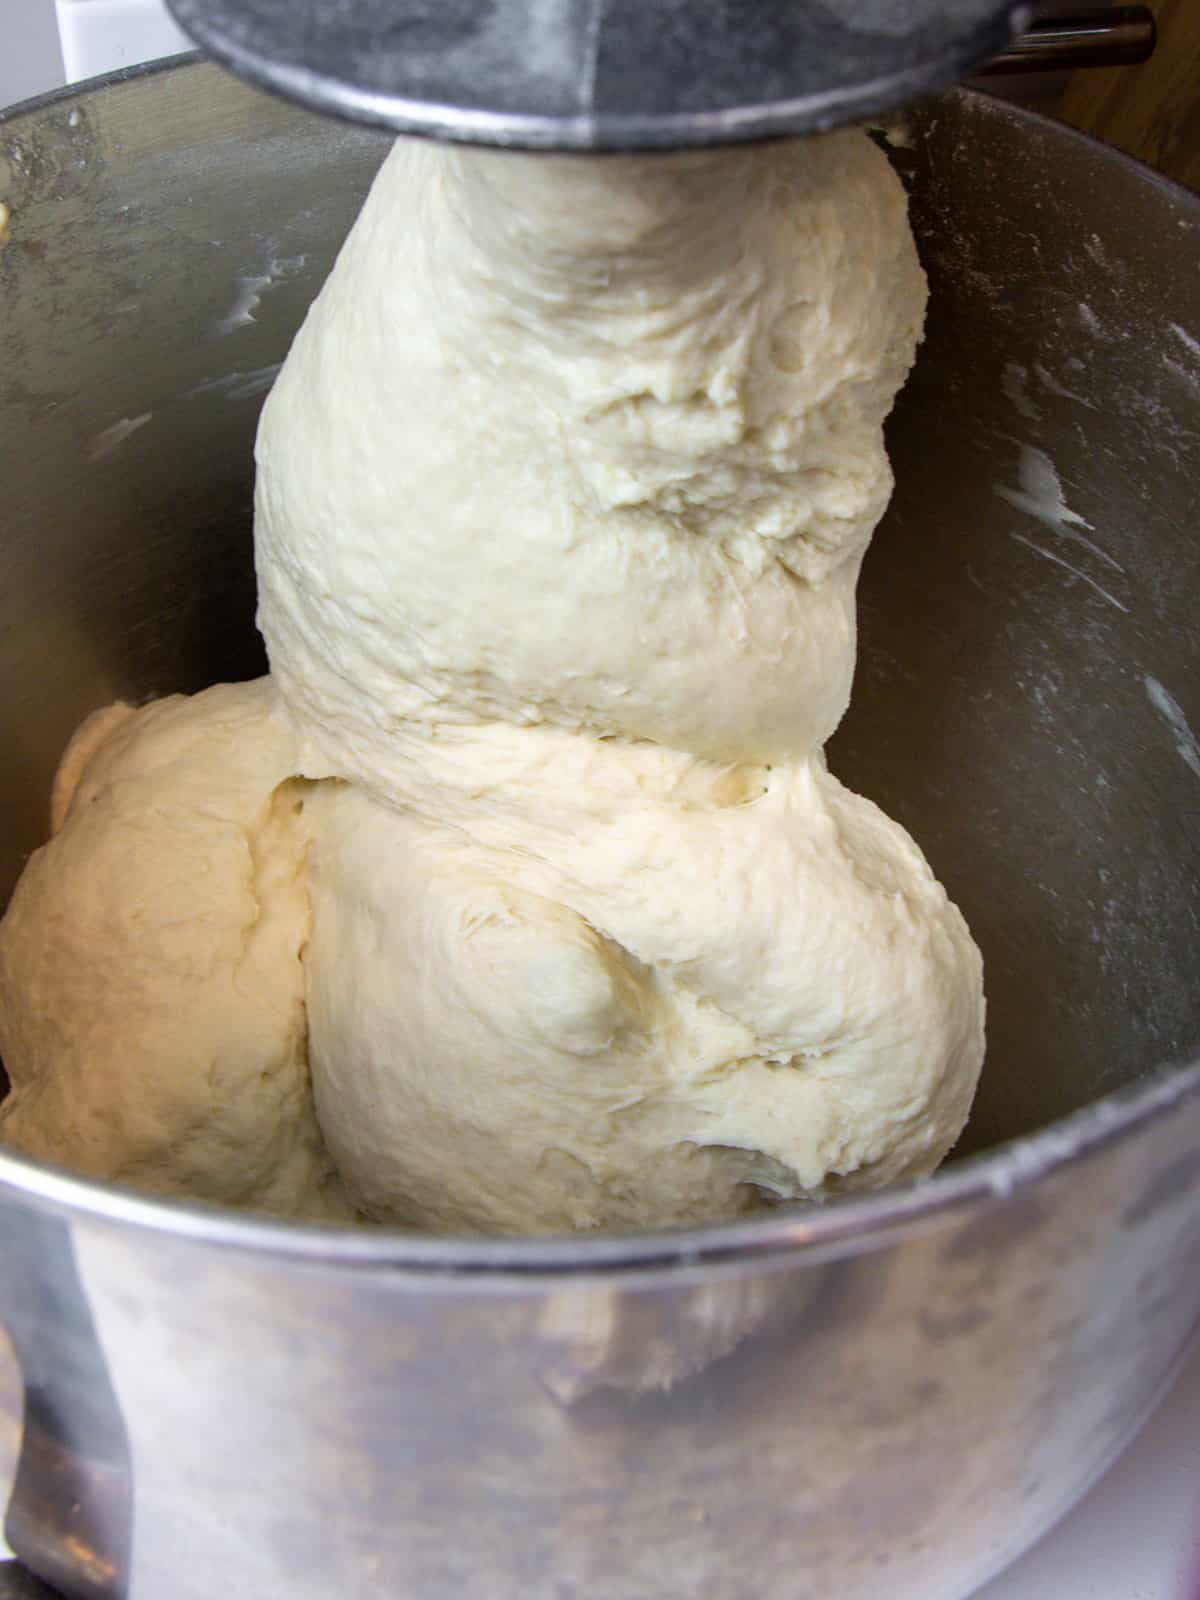 Pizza dough finished kneading with a dough hook.